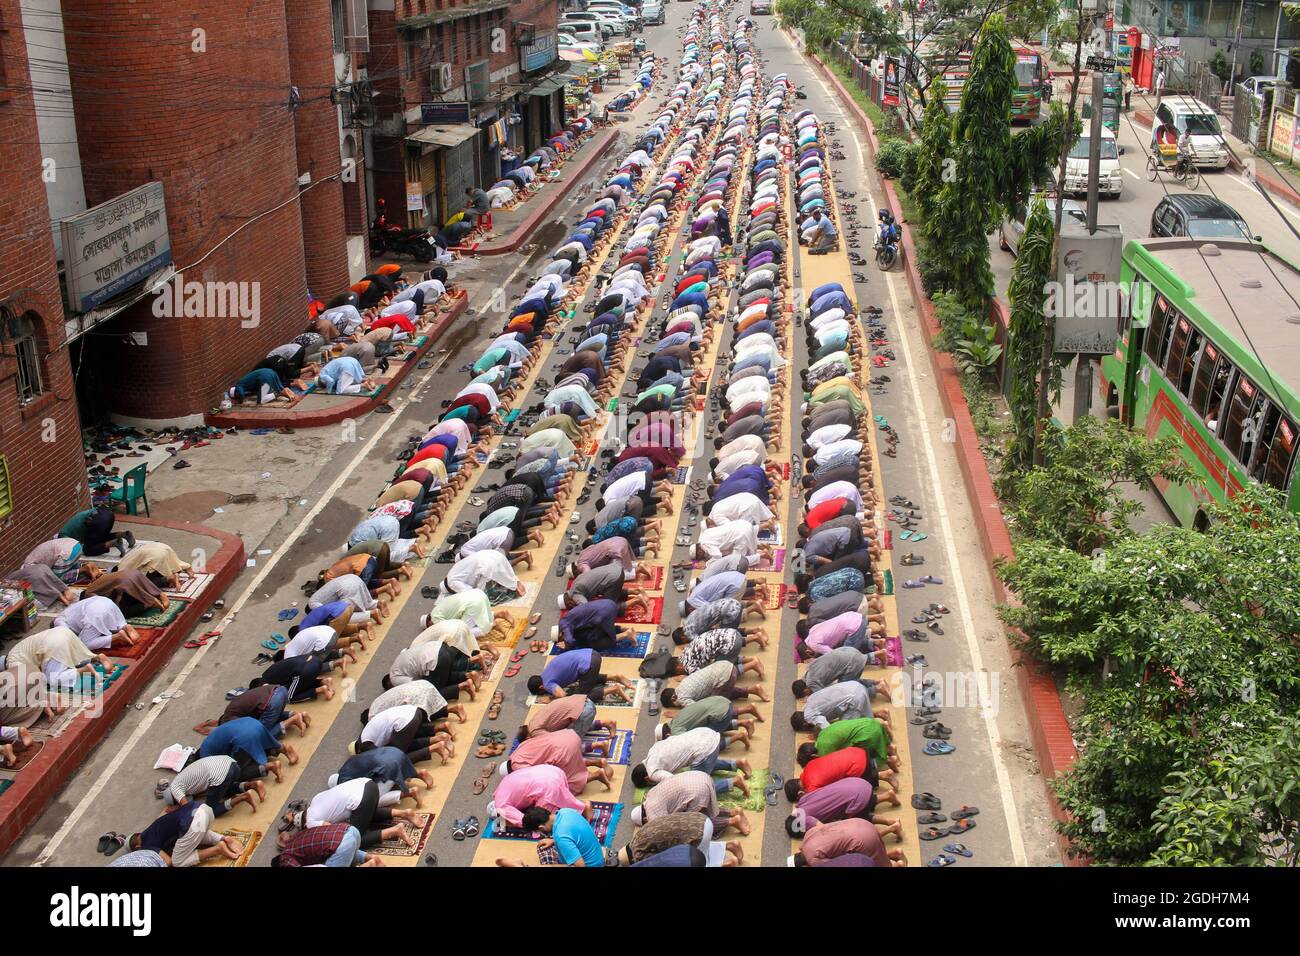 Dhaka, Bangladesh, August 13, 2021: Aerial view of thousands of Muslims meeting take part during a mass Jummah Prayer, Due this Islamic ritual is mandatory act, it is performed every Friday to fulfill its obligations as a faithful. Jummah is the holiest day of the week on which special congregational prayers are offered. Fridays are considered a celebration in their own right and Muslims take special care in wearing clean clothes, bathing, and preparing special meals on this day. Credit: Abu Sufian Jewel/Eyepix Group/Alamy Live News Stock Photo